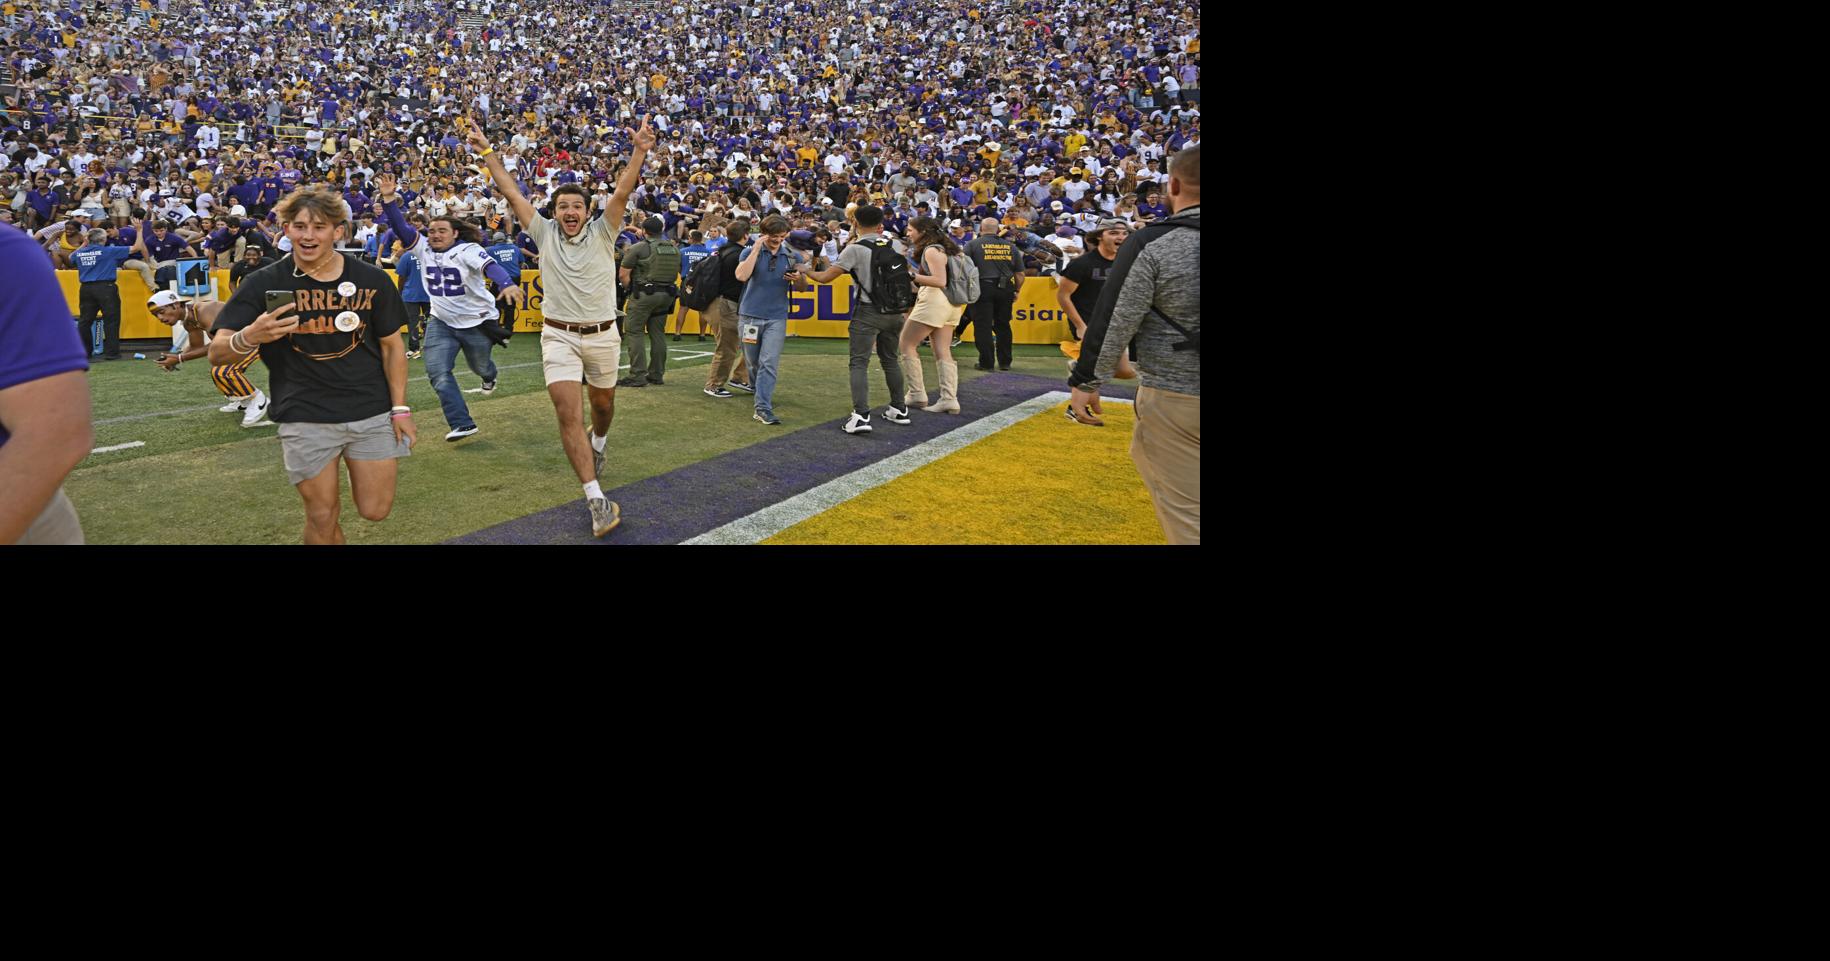 Lsu Fined 250000 After Fans Rushed The Field To Celebrate Beating Ole Miss Lsu